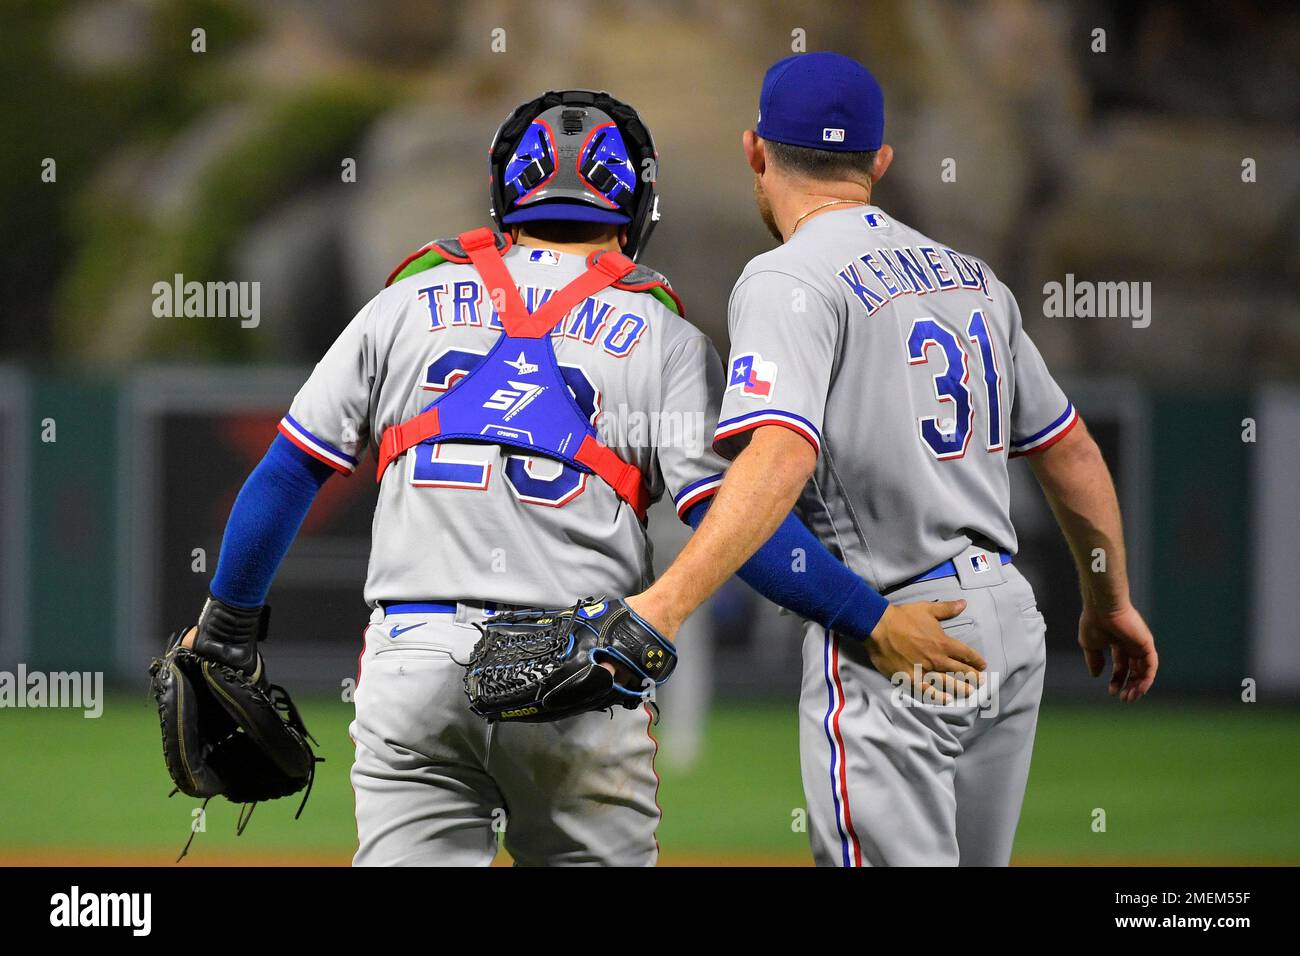 Texas Rangers catcher Jose Trevino, left, and relief pitcher Ian Kennedy,  right, congratulate each other as players celebrate in the background after  the Rangers defeated the Los Angeles Angels 6-4 in a